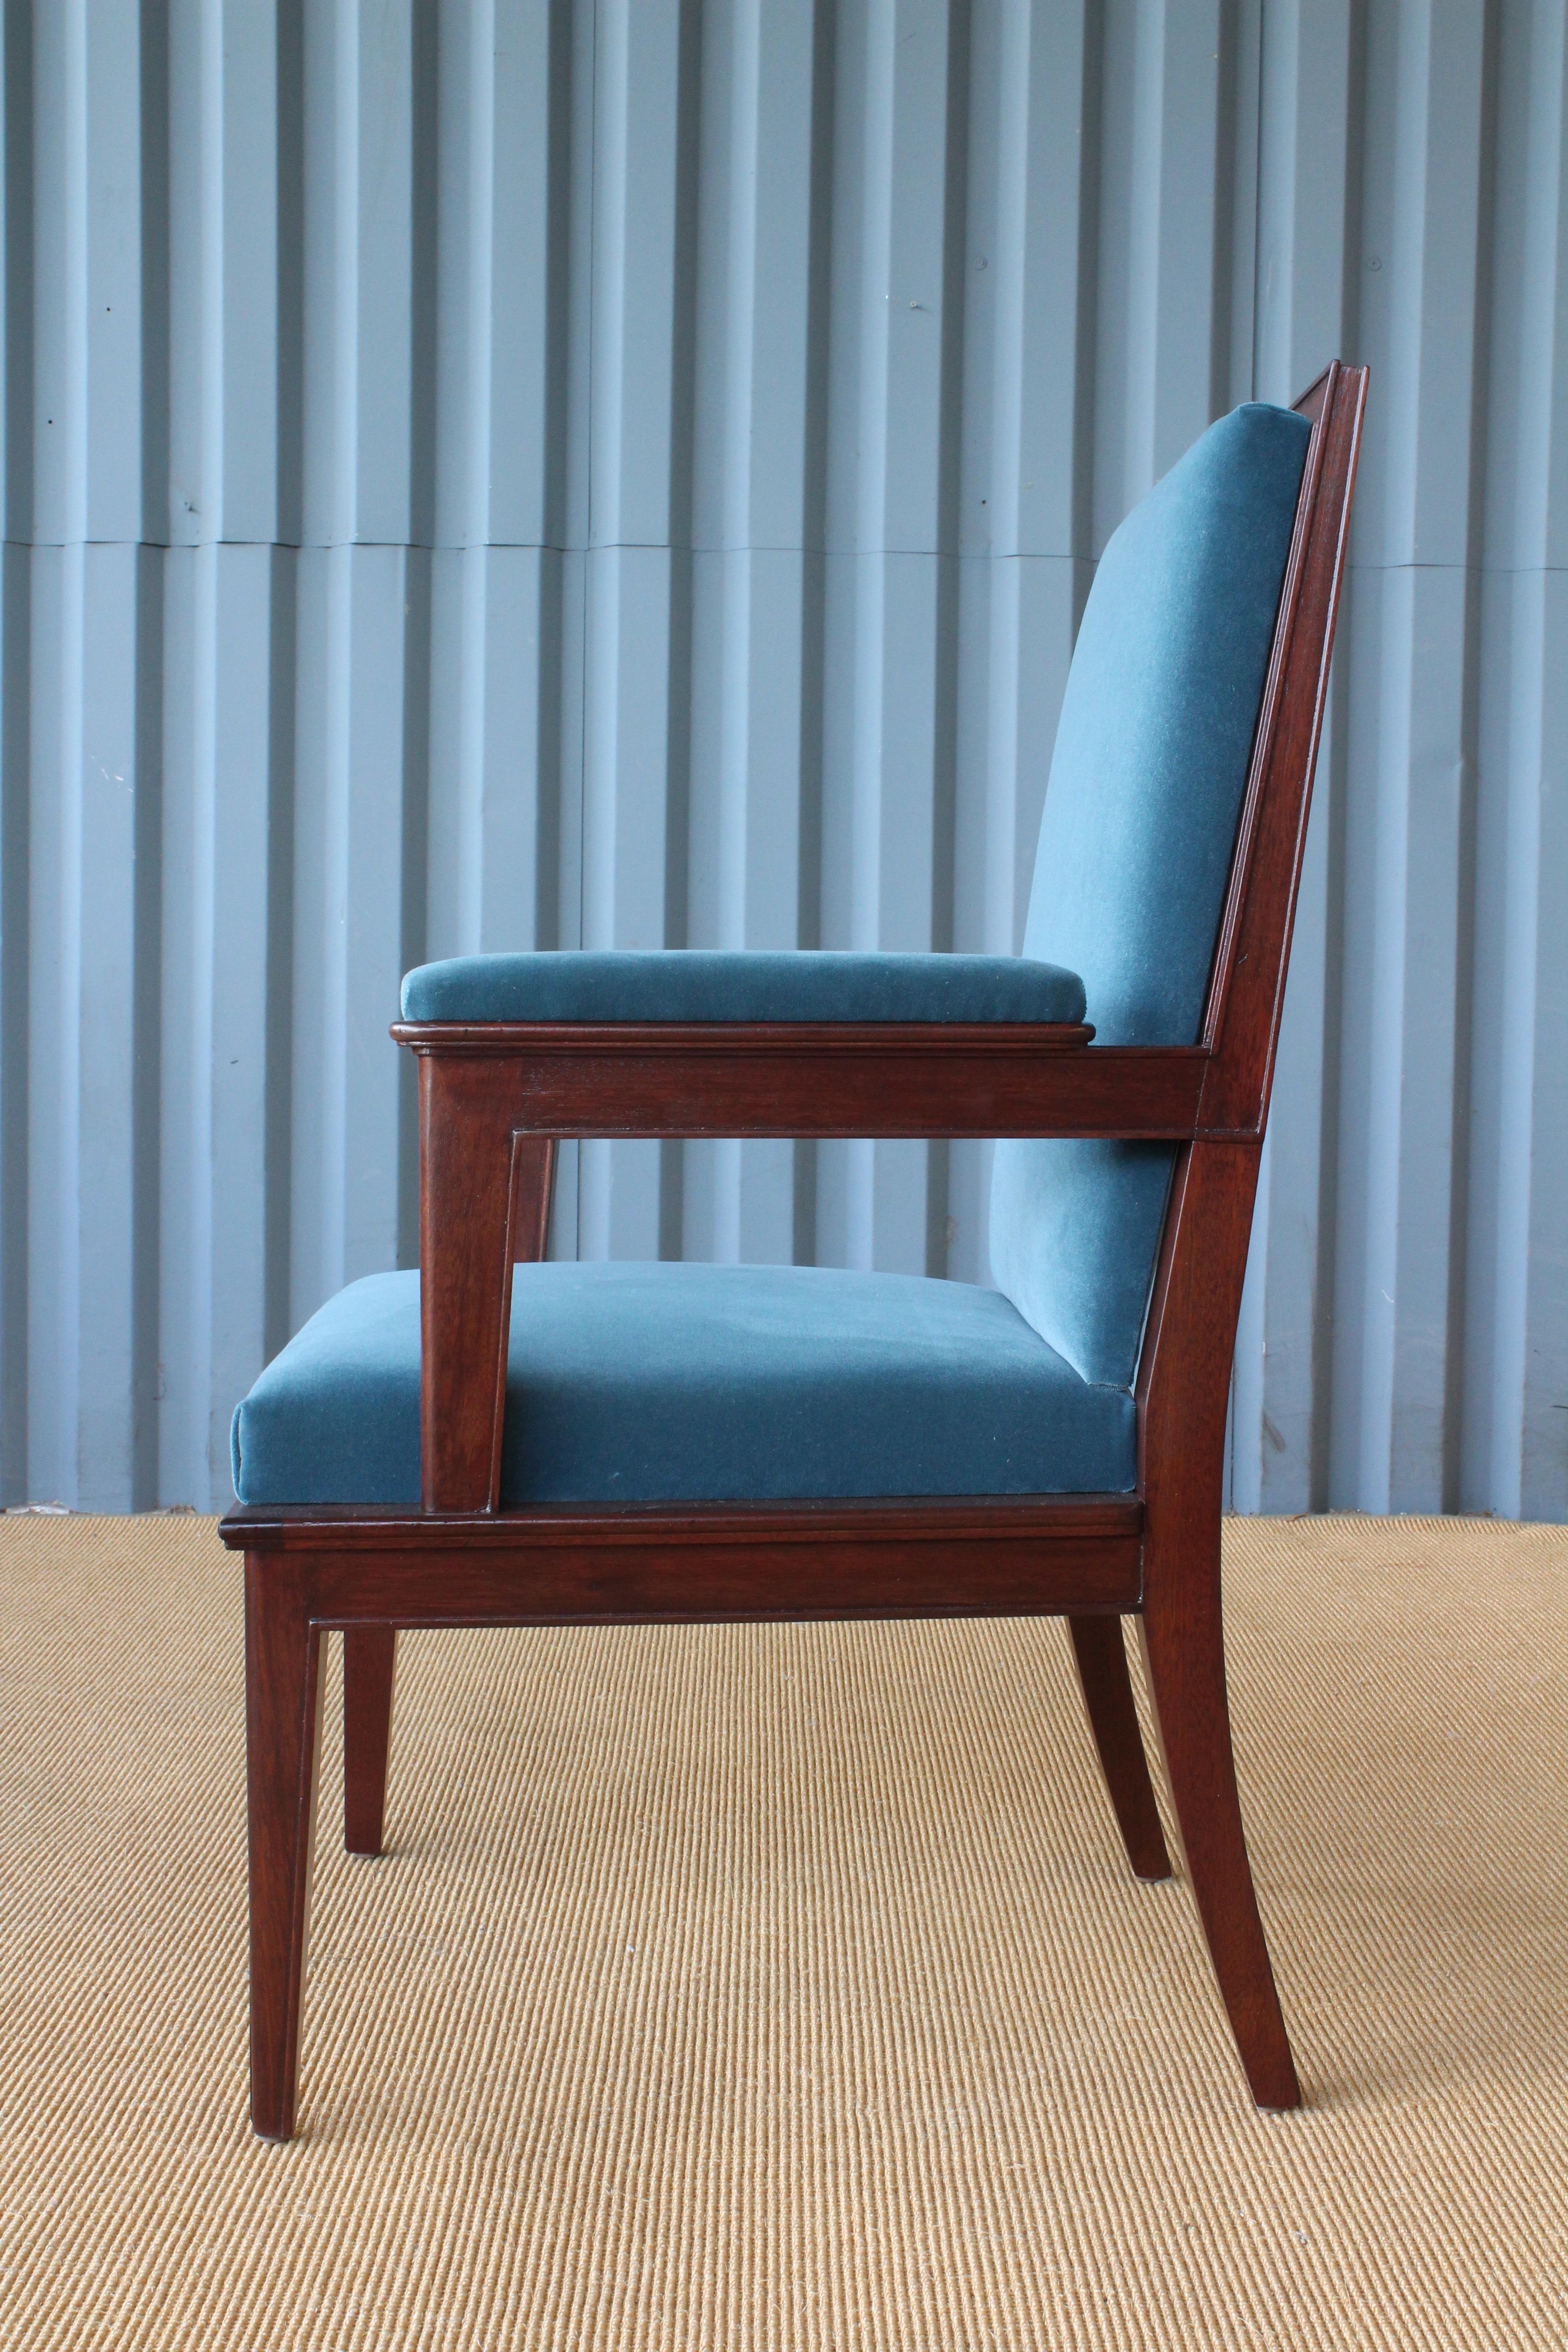 French Mahogany Armchair in Velvet, France, 1940s. Set of Four Available.